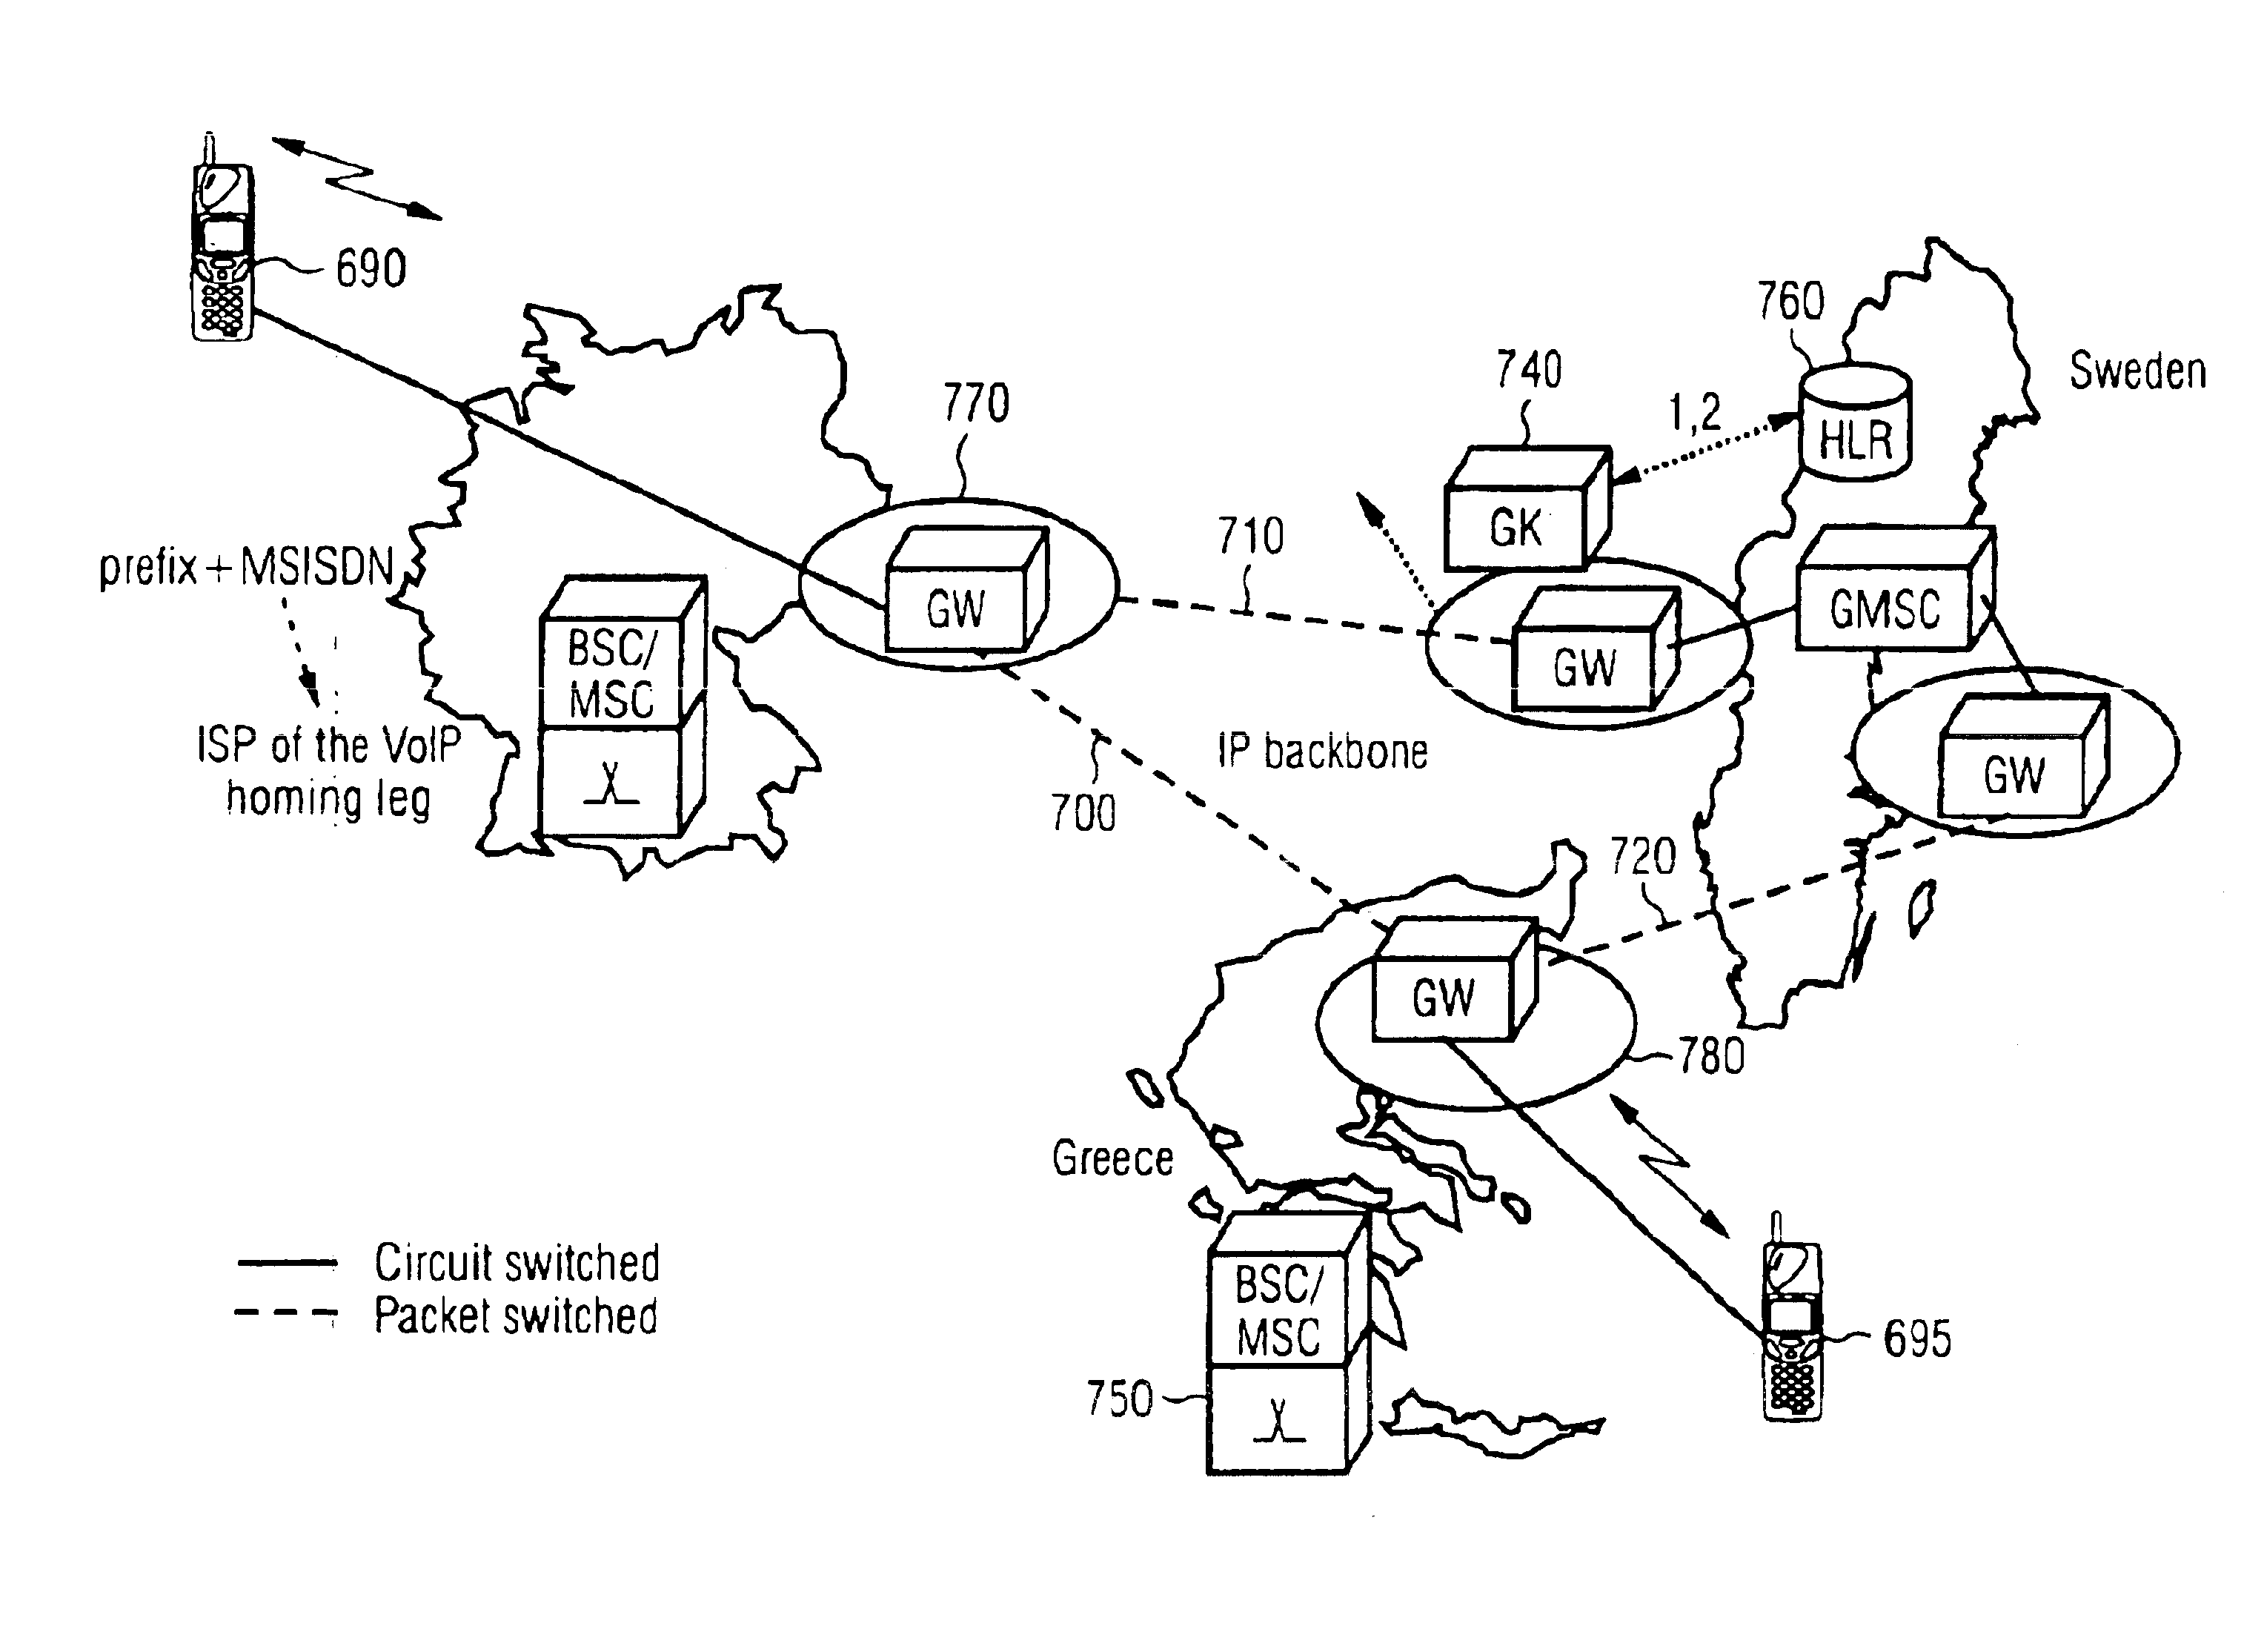 Methods and systems for call routing and codec negotiation in hybrid voice/data/internet/wireless systems